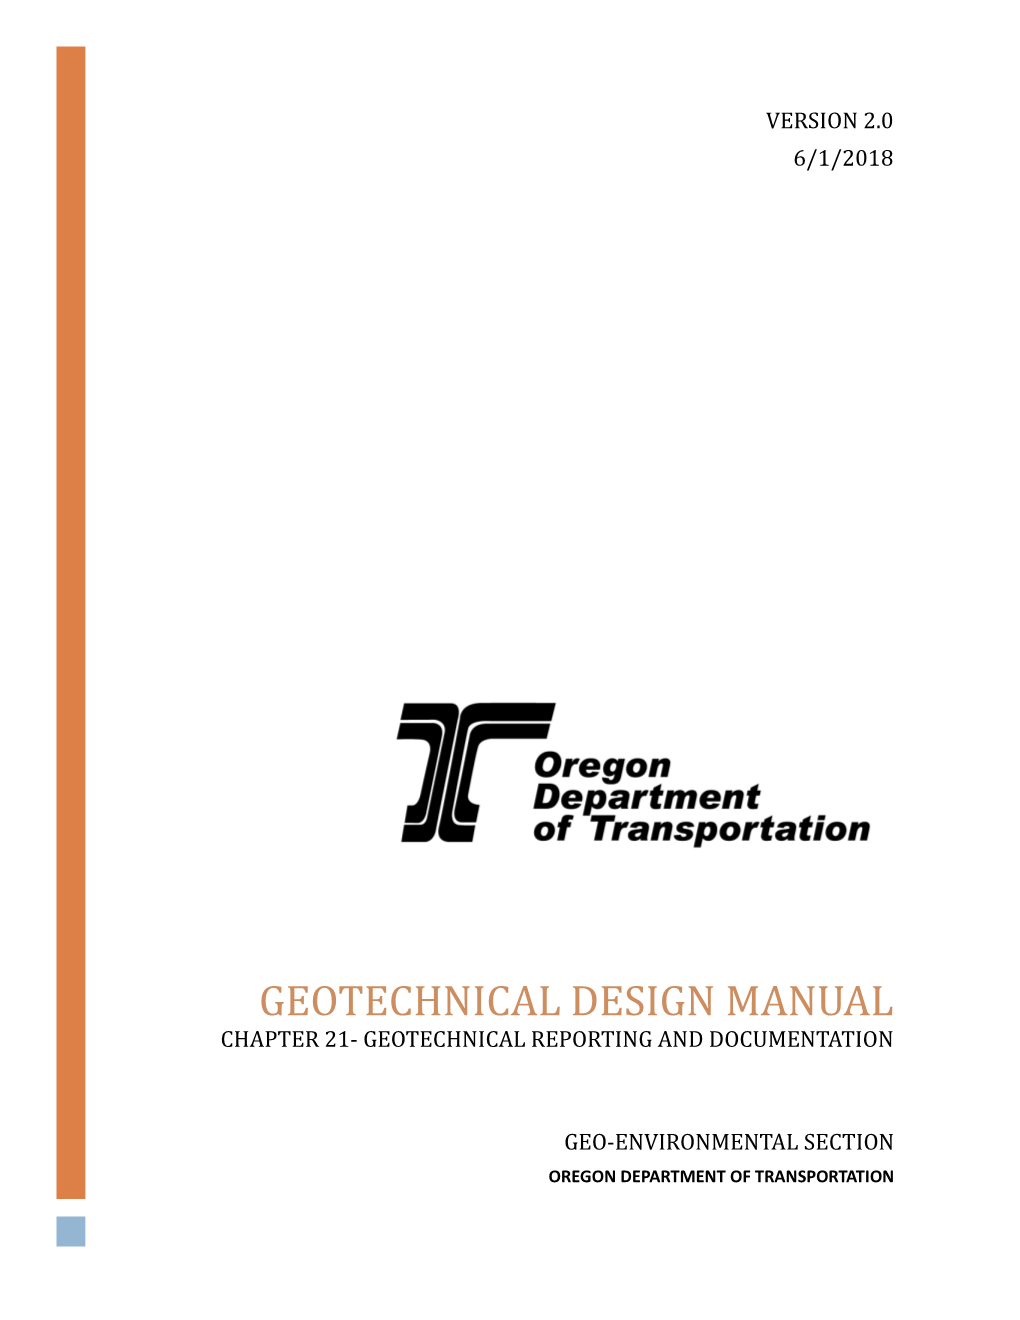 Geotechnical Desing Manual